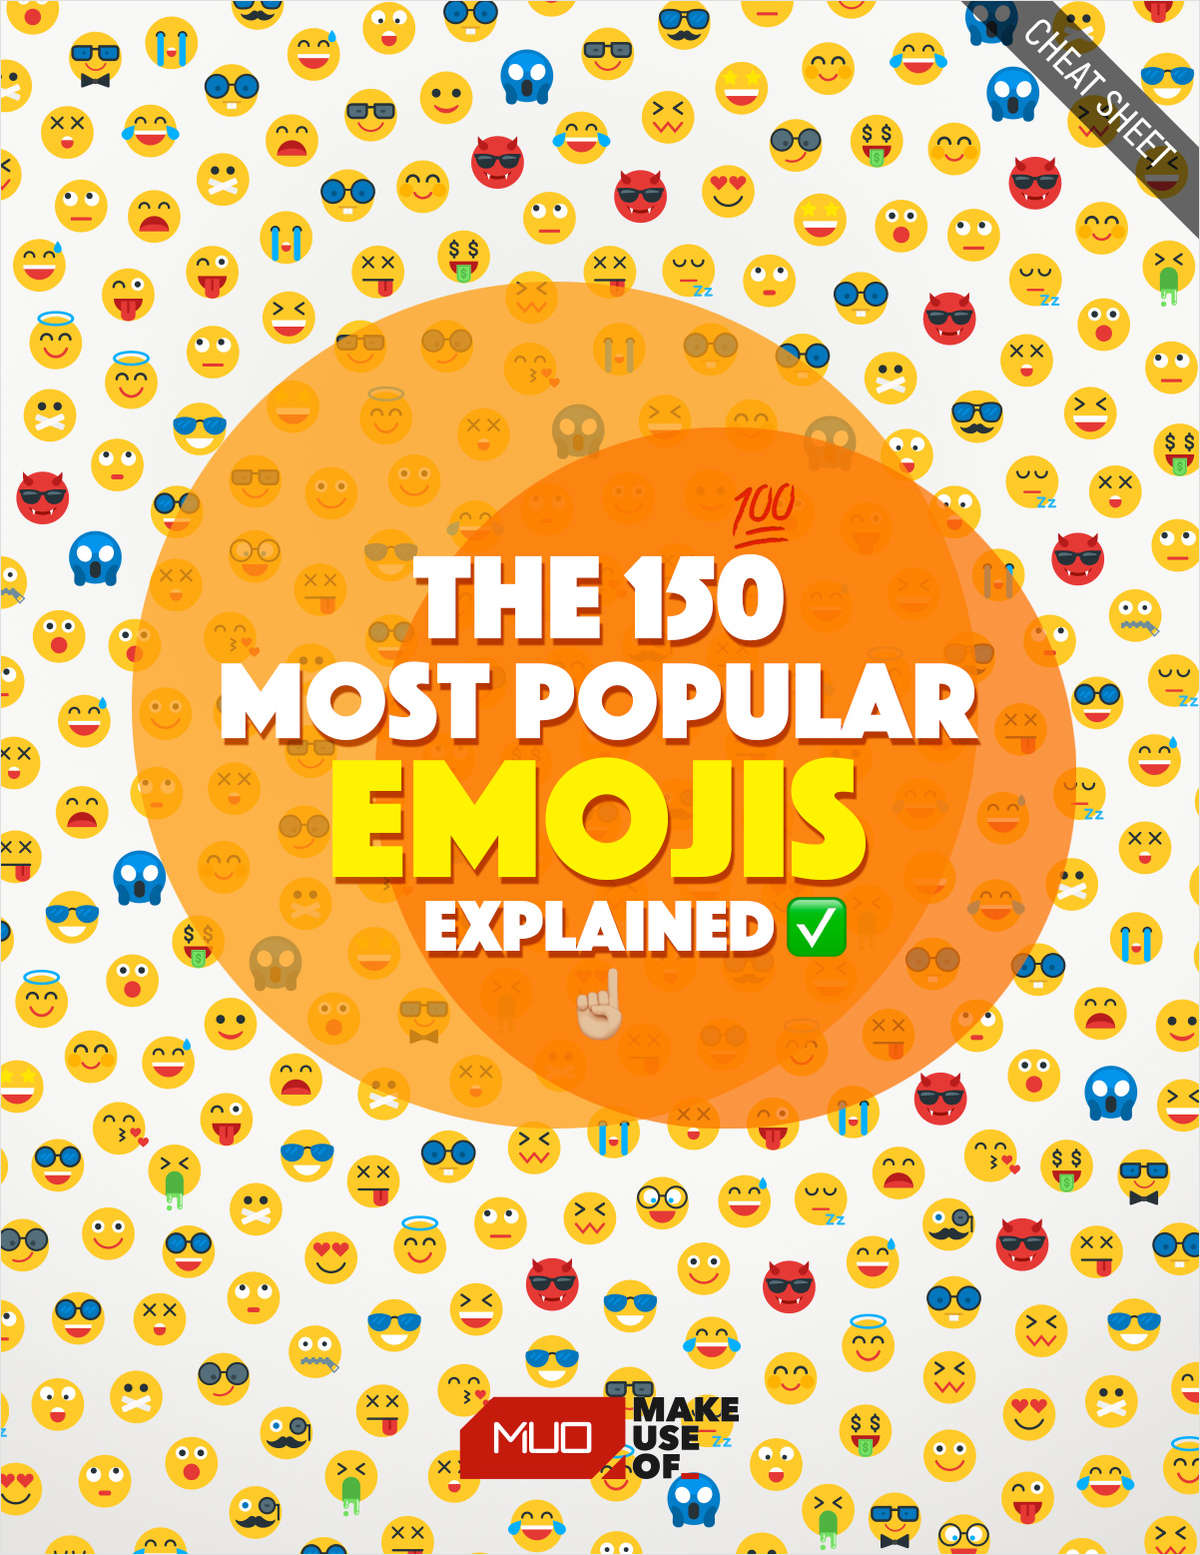 The 150 Most Popular Emojis Explained